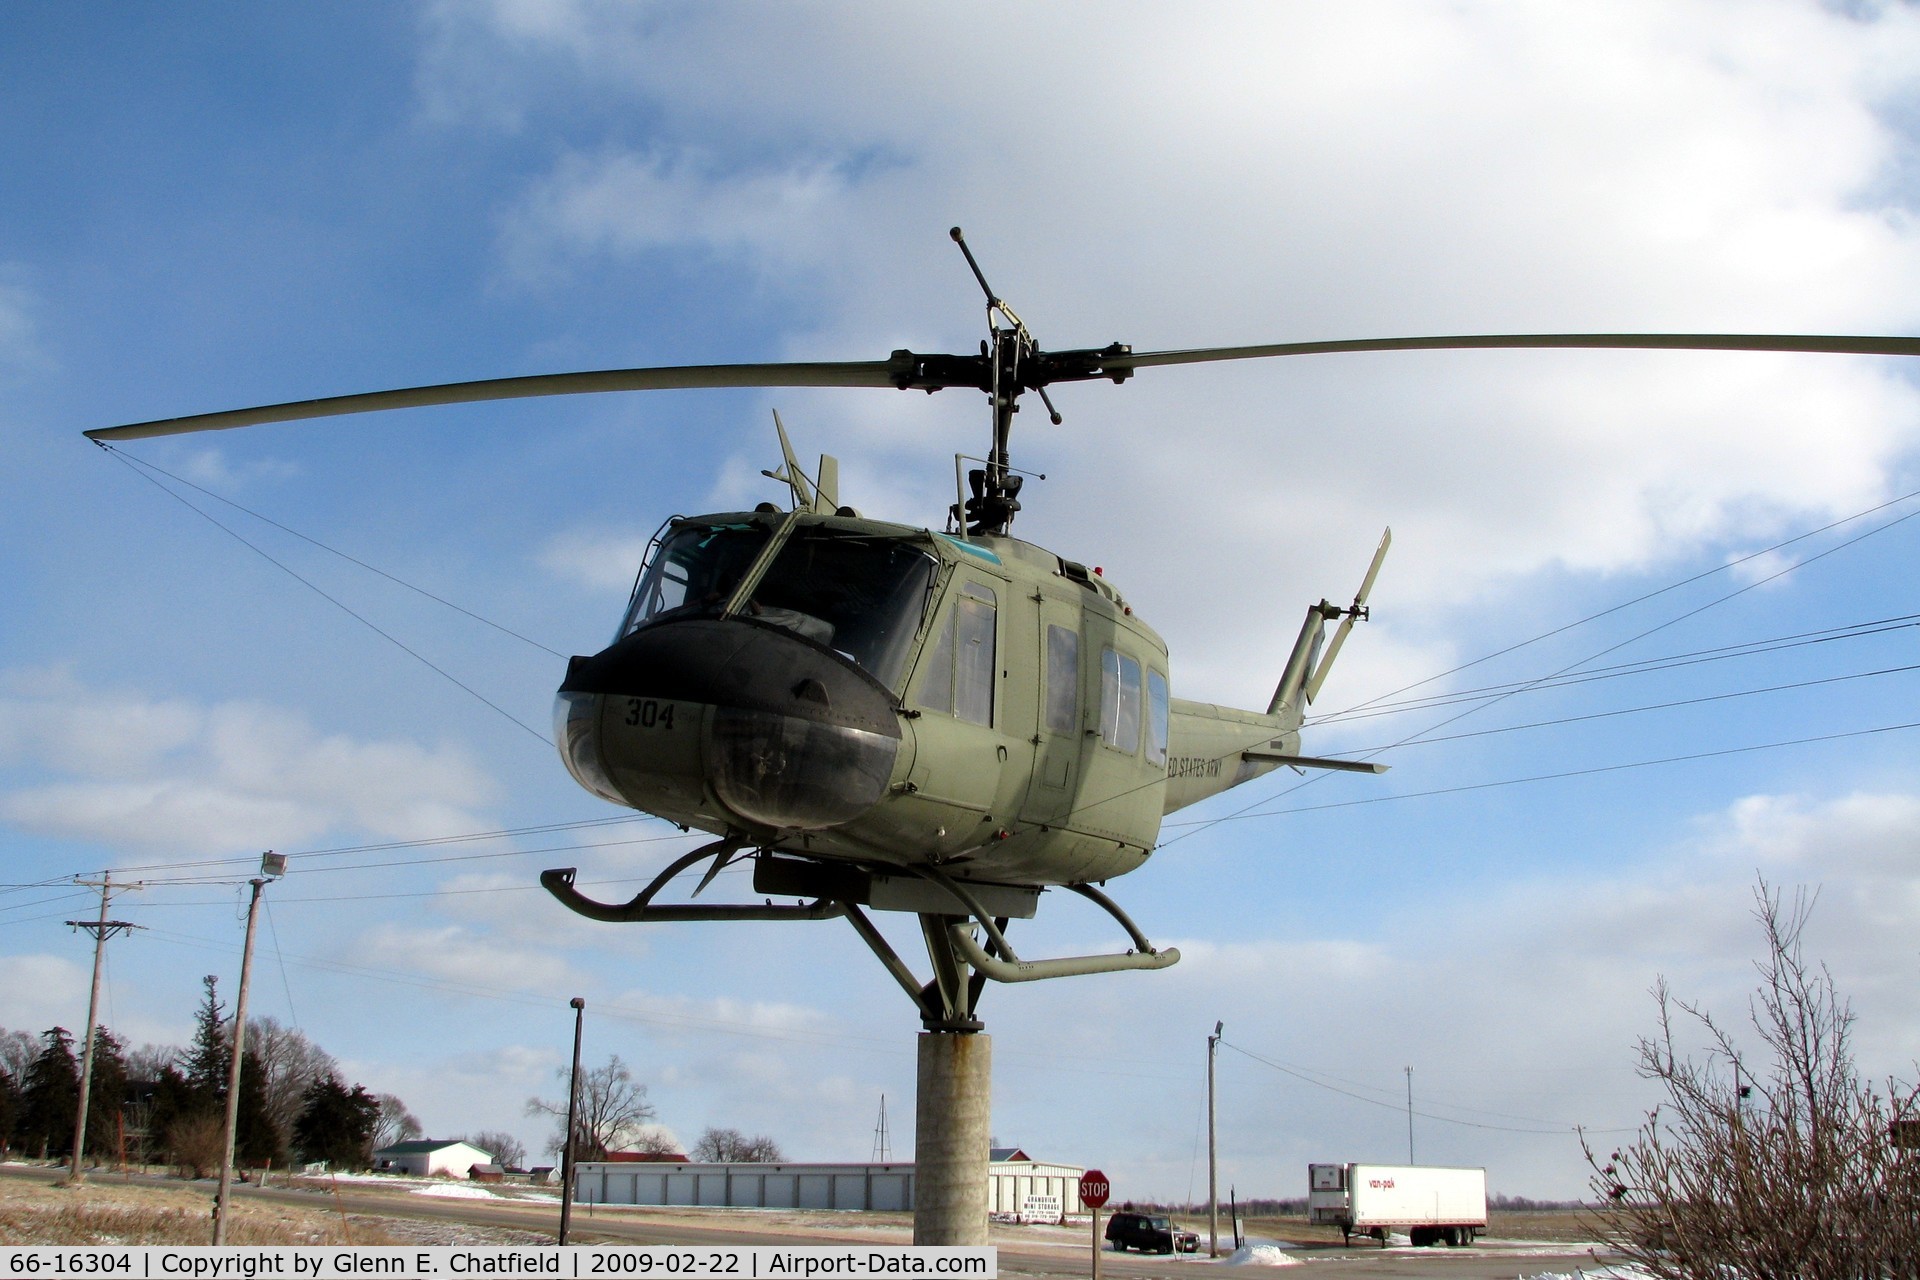 66-16304, 1966 Bell UH-1H Iroquois C/N 5998, At the All Veterans Memorial, Grandview, IA.  Found by using Andy Marden's book, 